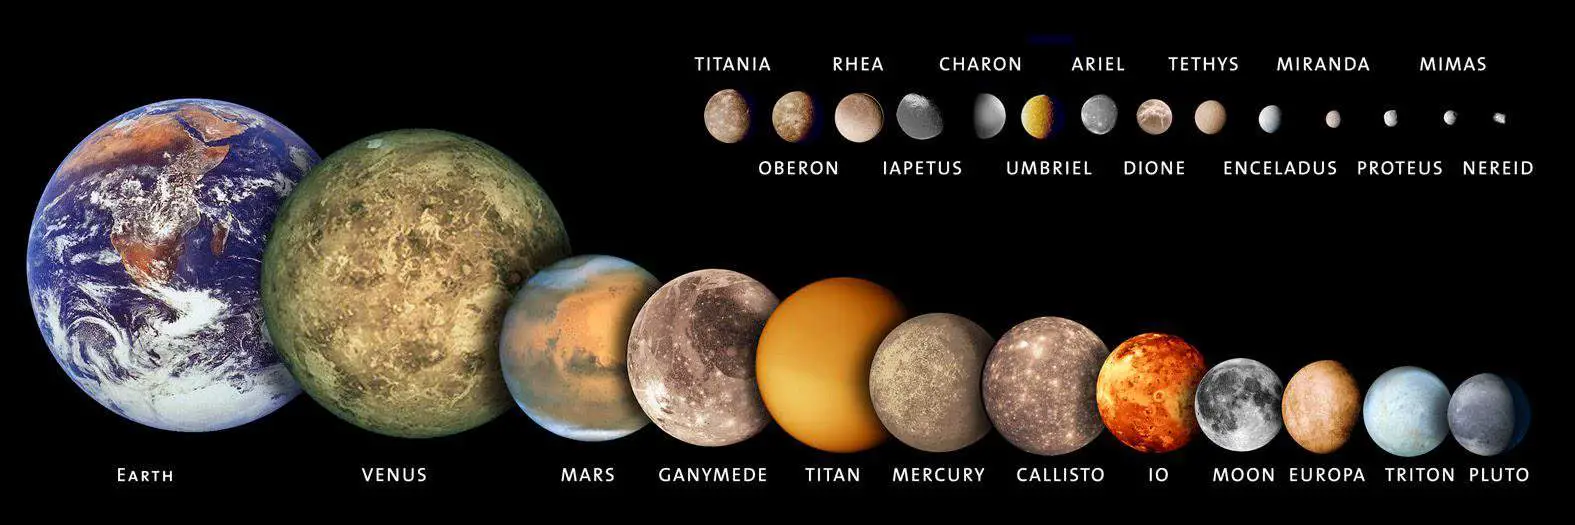 Top 10 largest non-planets in our solar system